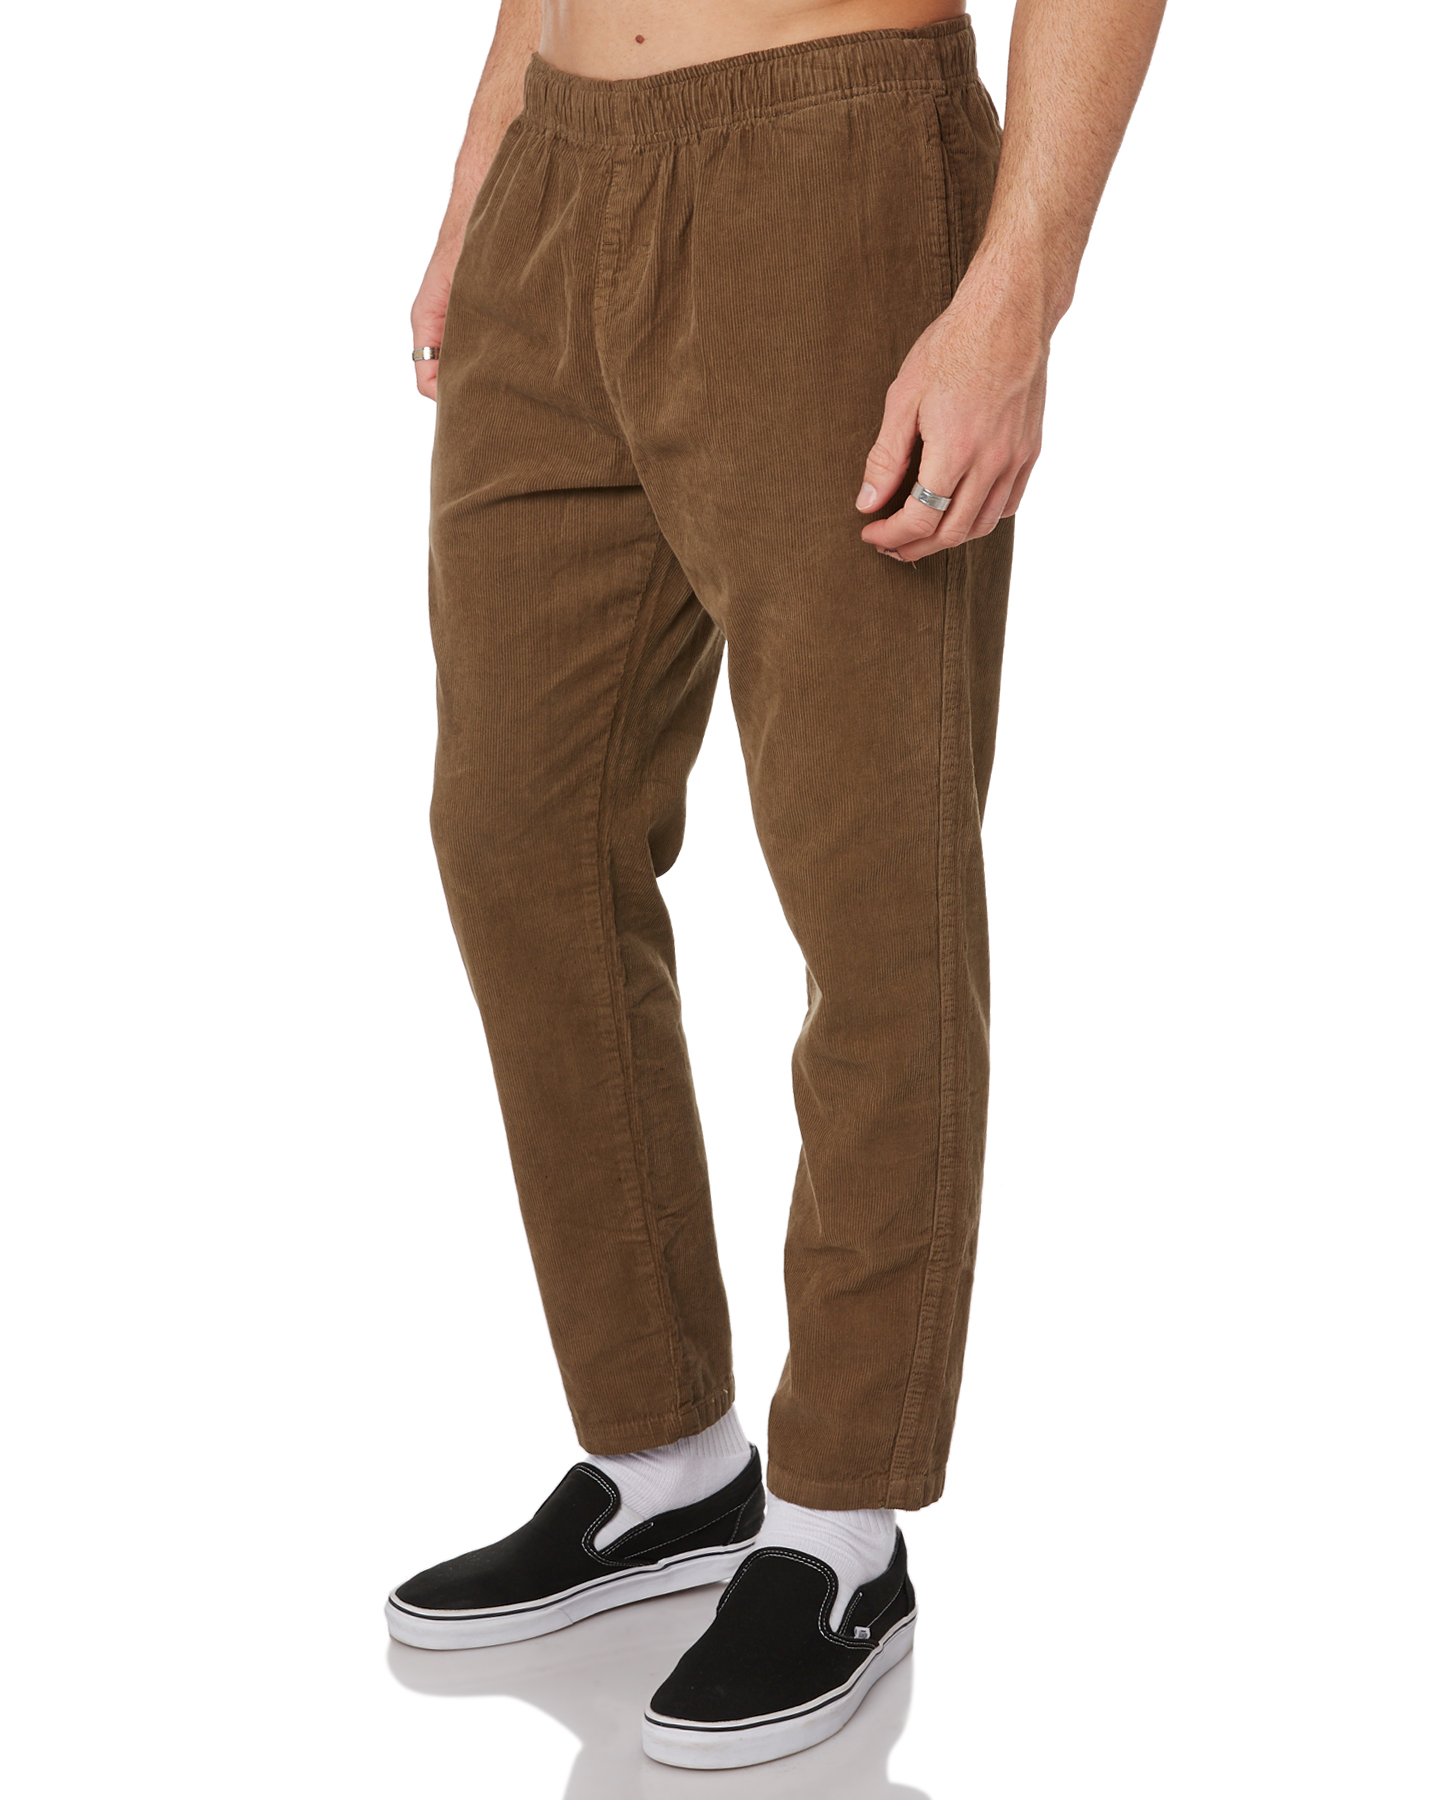 Swell Cord Mens Beach Pant - Dust | SurfStitch